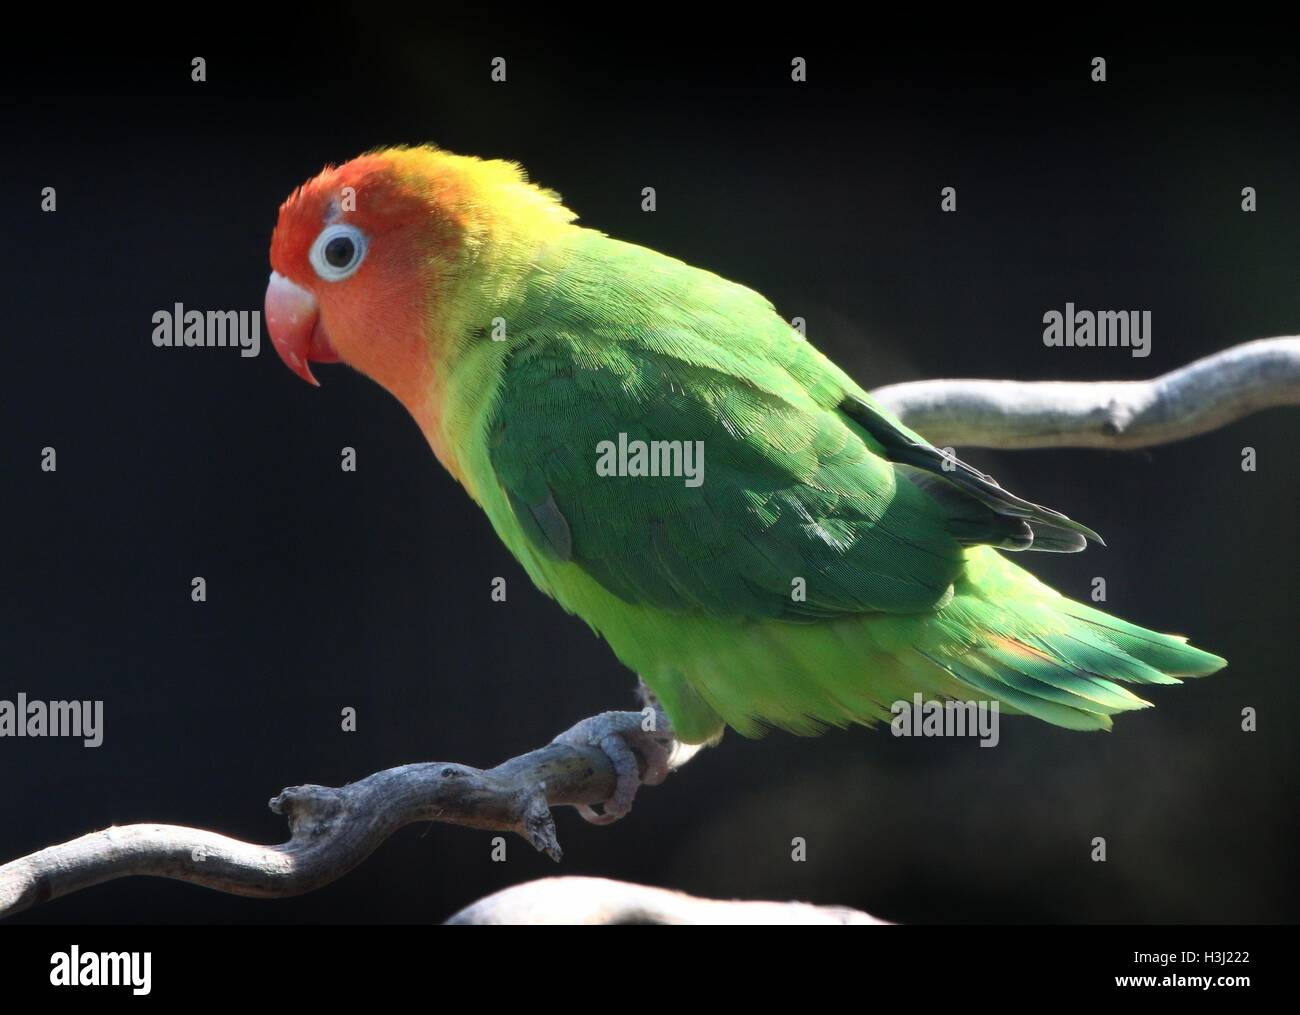 Southeast African Nyasa or Lilian's Lovebird (Agapornis lilianae), a small parrot variety. Stock Photo